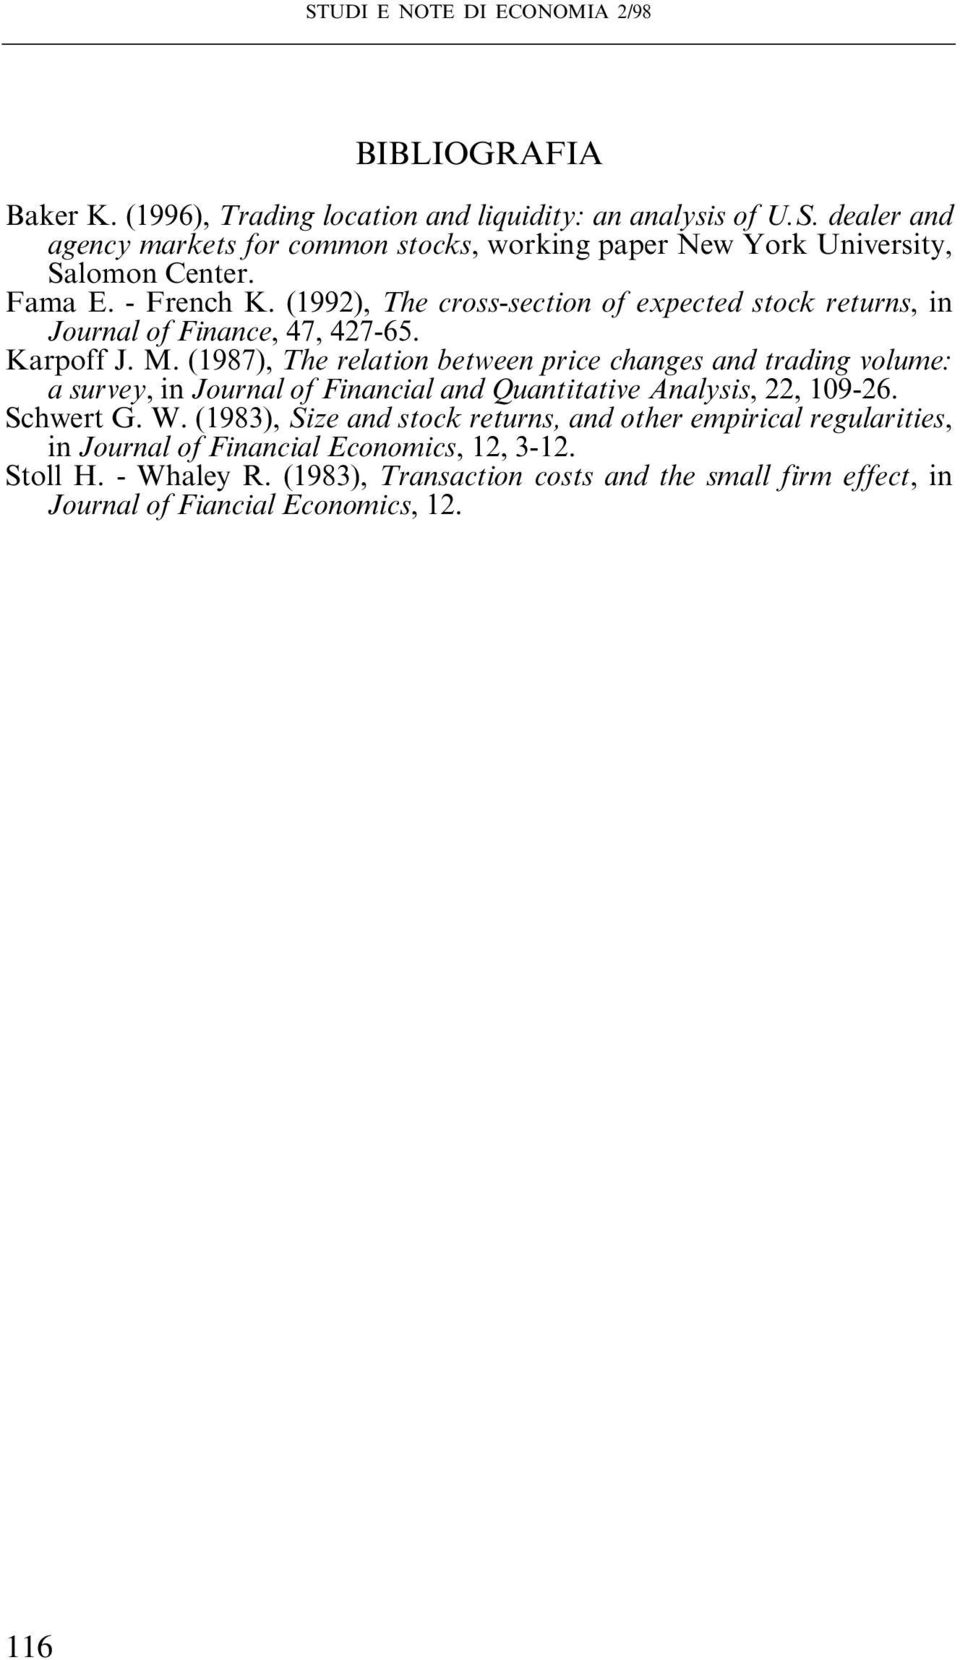 (1992), The cross-section of expected stock returns, in Journal of Finance, 47, 427-65. Karpoff J. M.